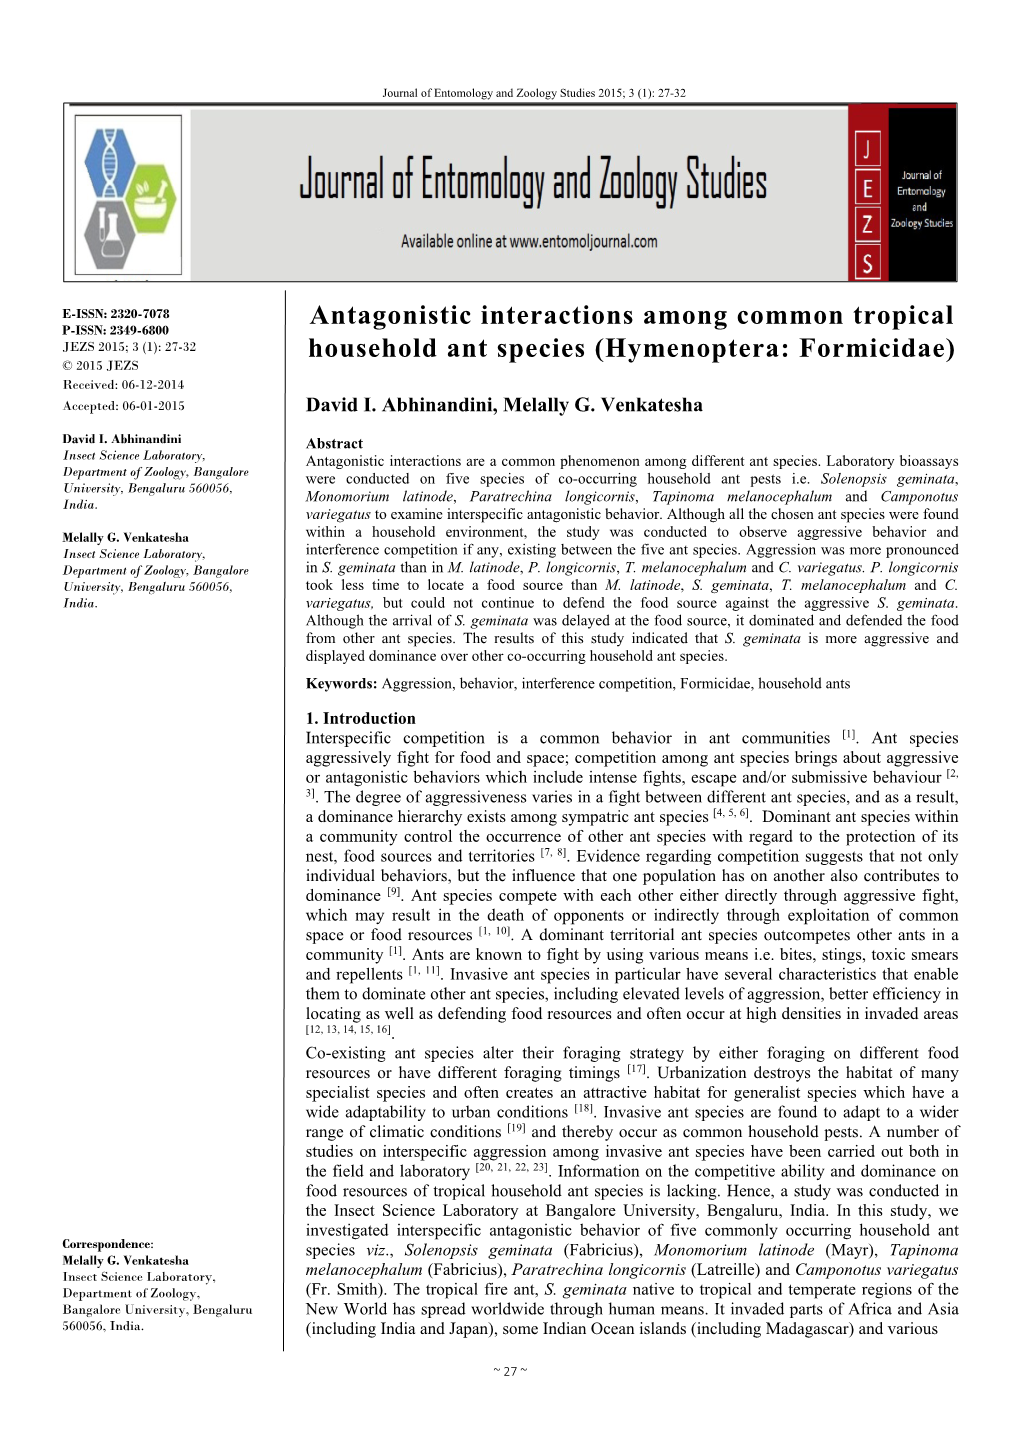 Antagonistic Interactions Among Common Tropical Household Ant